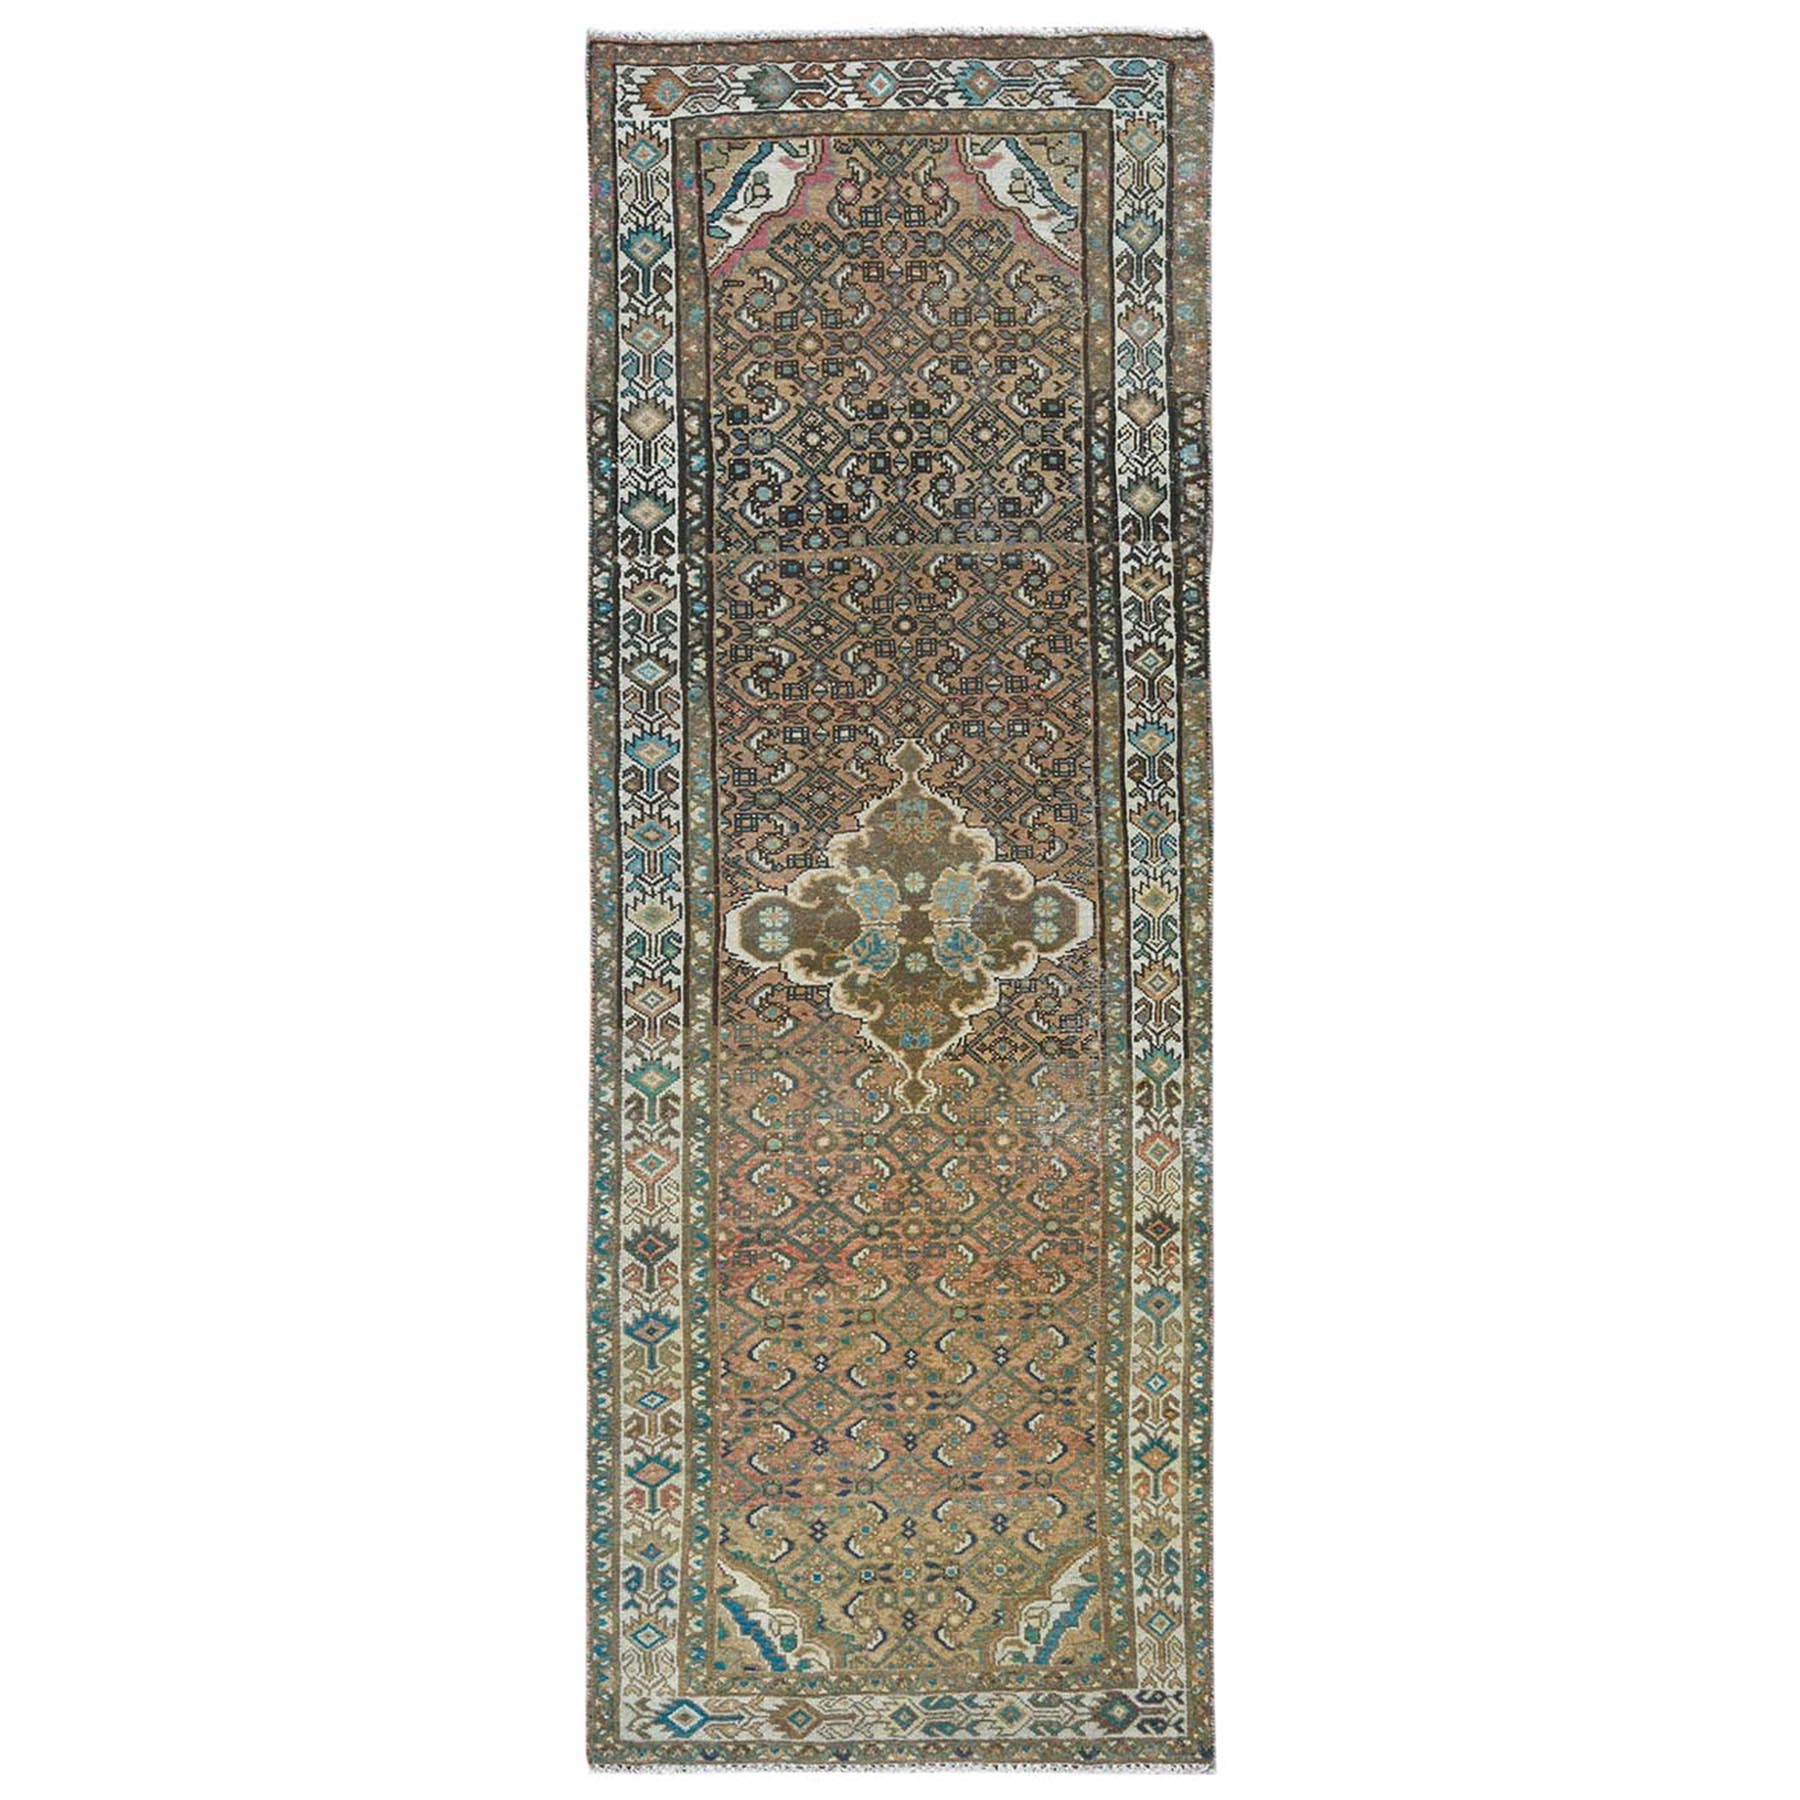 3'3"x9'2" Mocha Brown, Vintage Persian Hamadan with Fish Mahi Design, Abrash, Distressed, Cropped Thin, Hand Woven Pure Wool Wide Runner Oriental Rug 